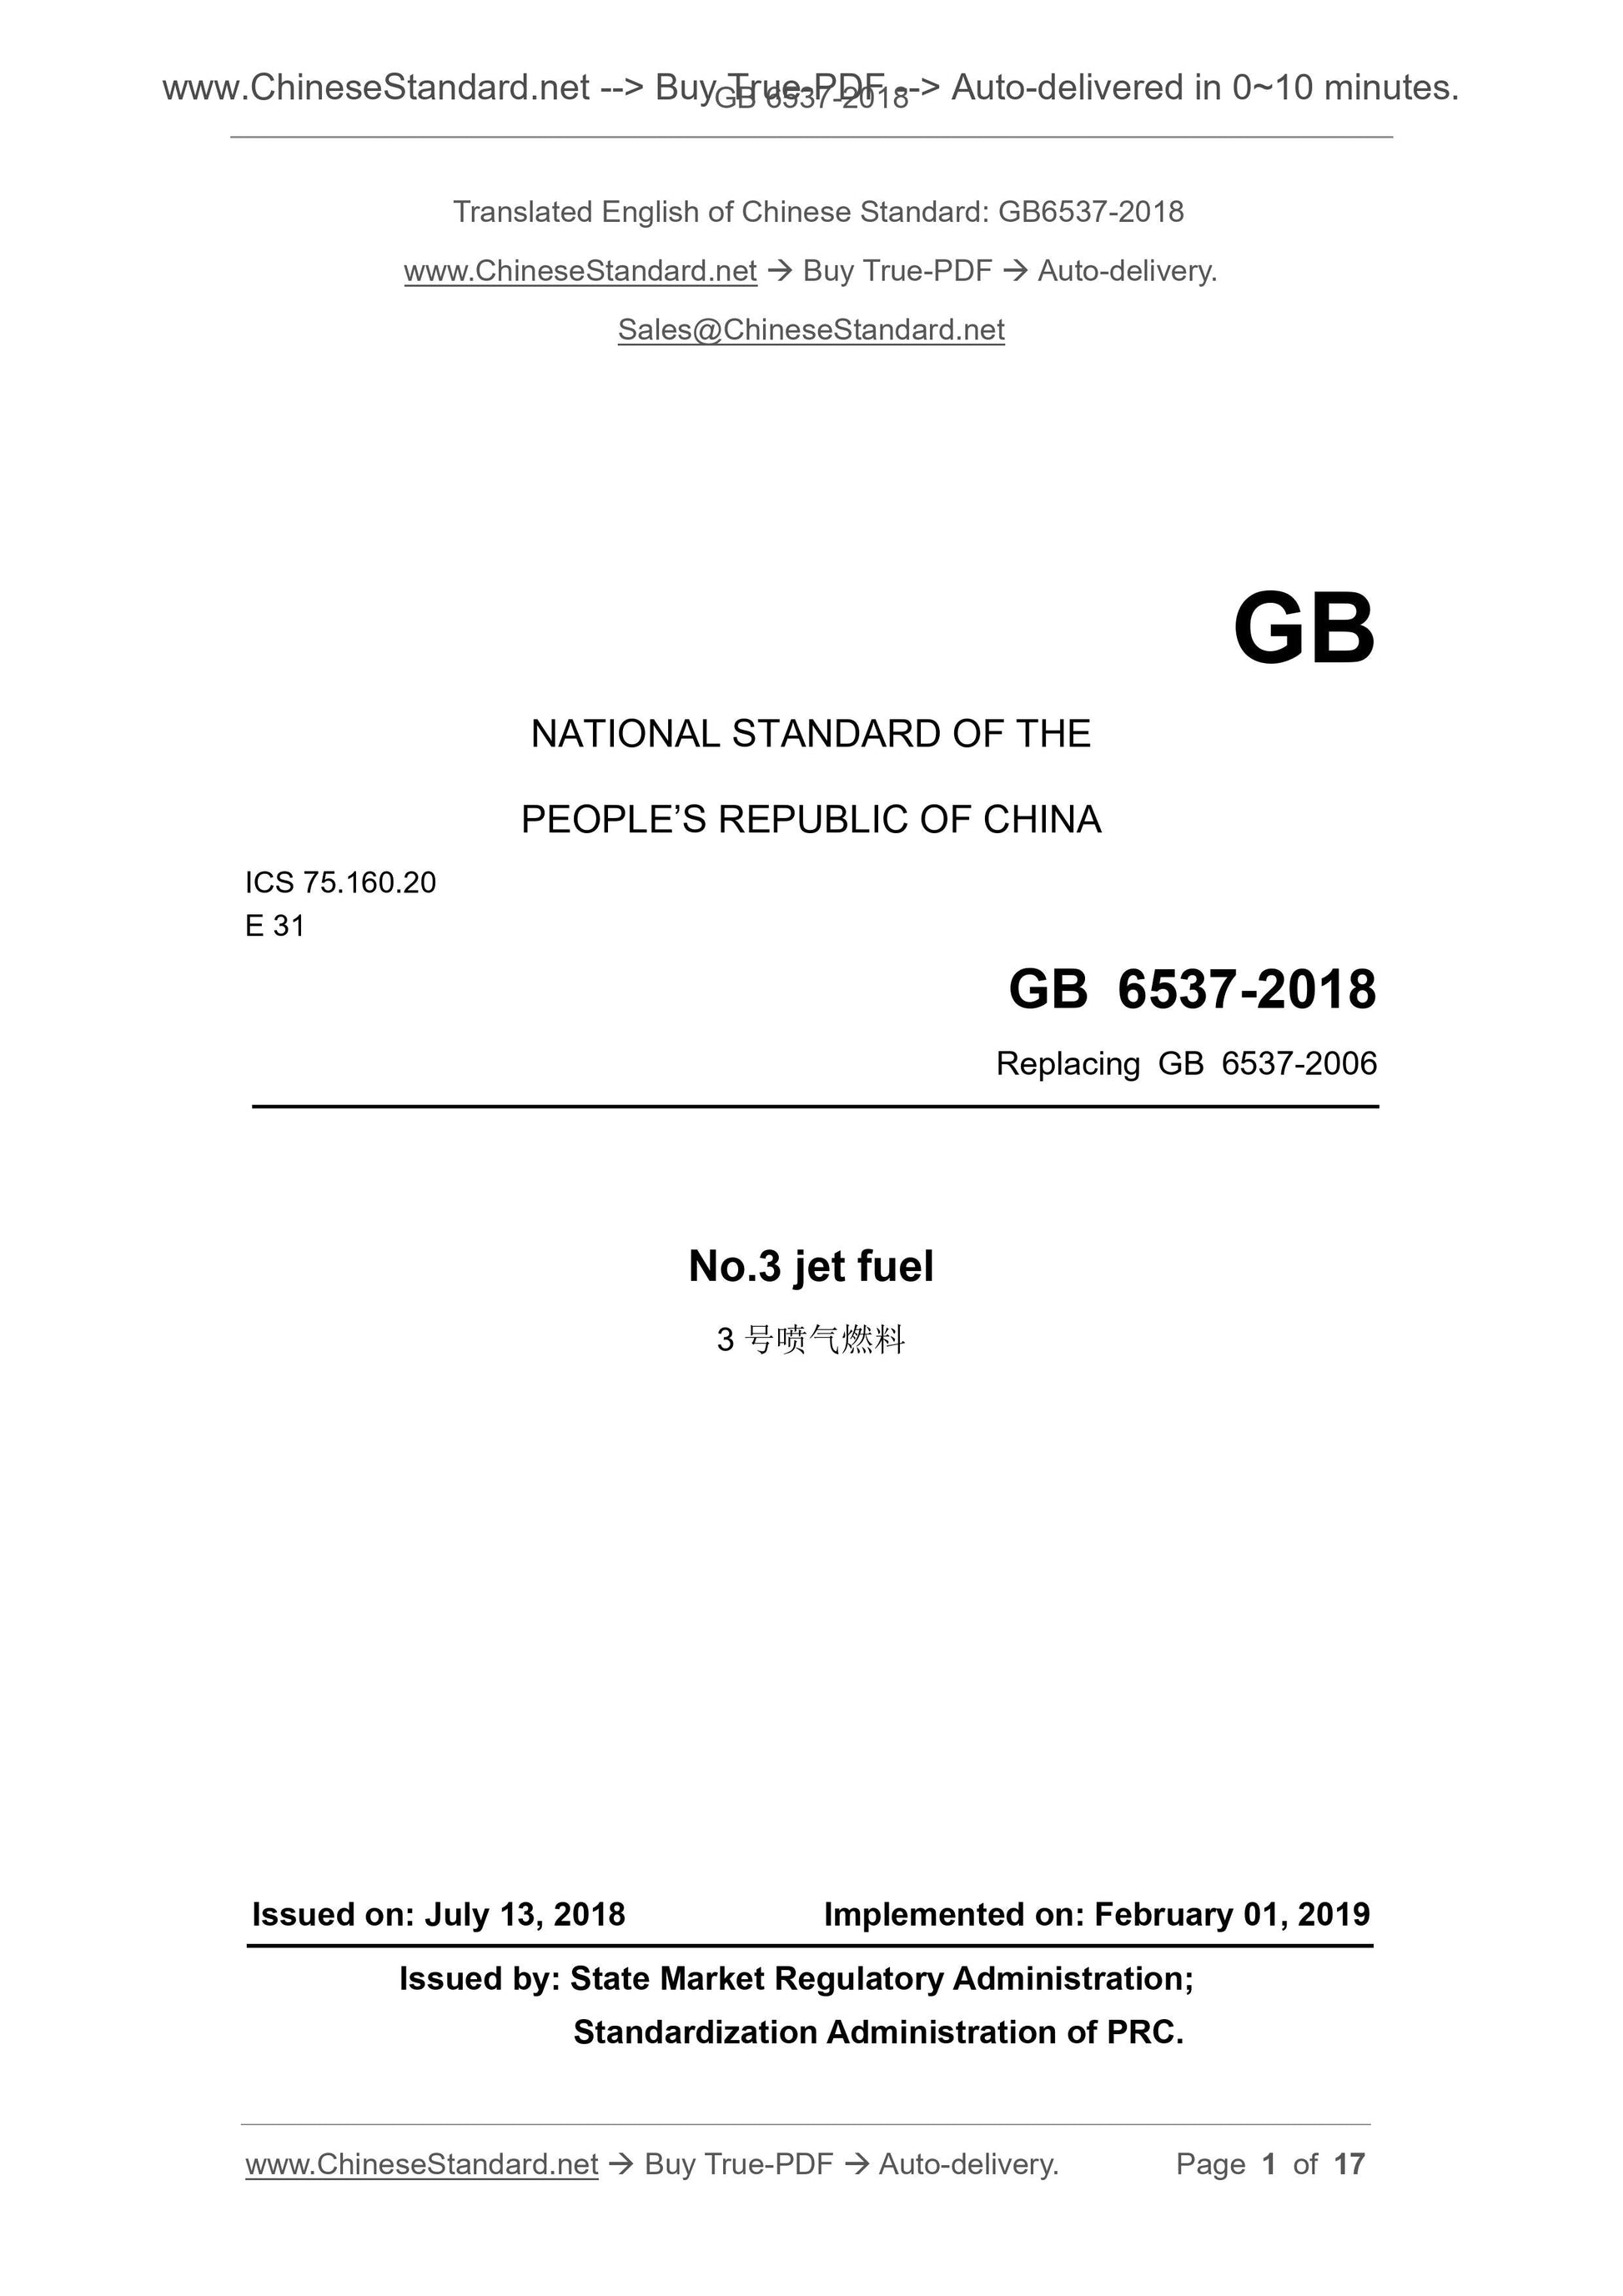 GB 6537-2018 Page 1